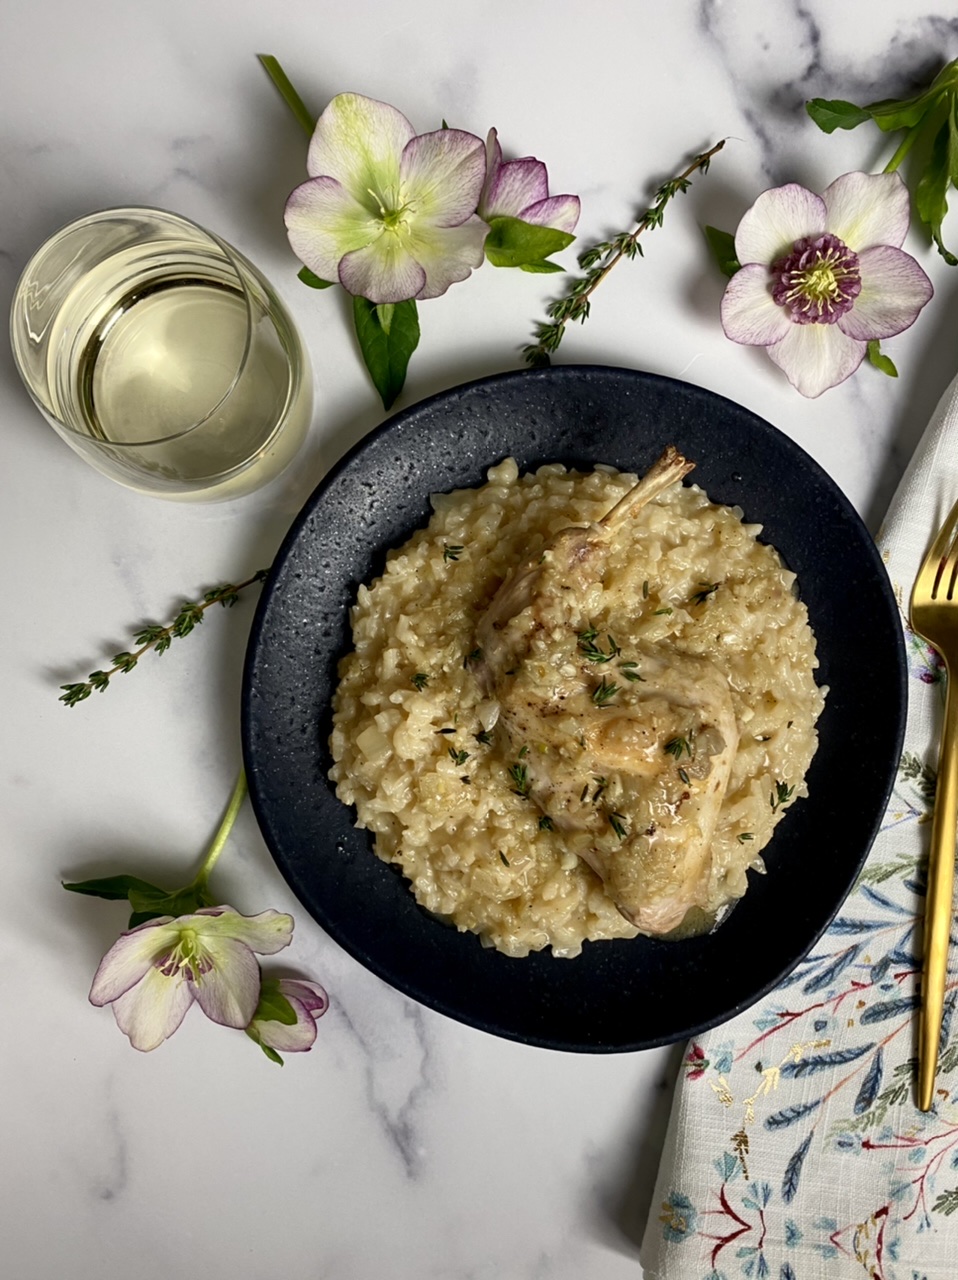 Roasted Leg of Rabbit & Risotto with Pan Sauce - the Old Woman and the Sea